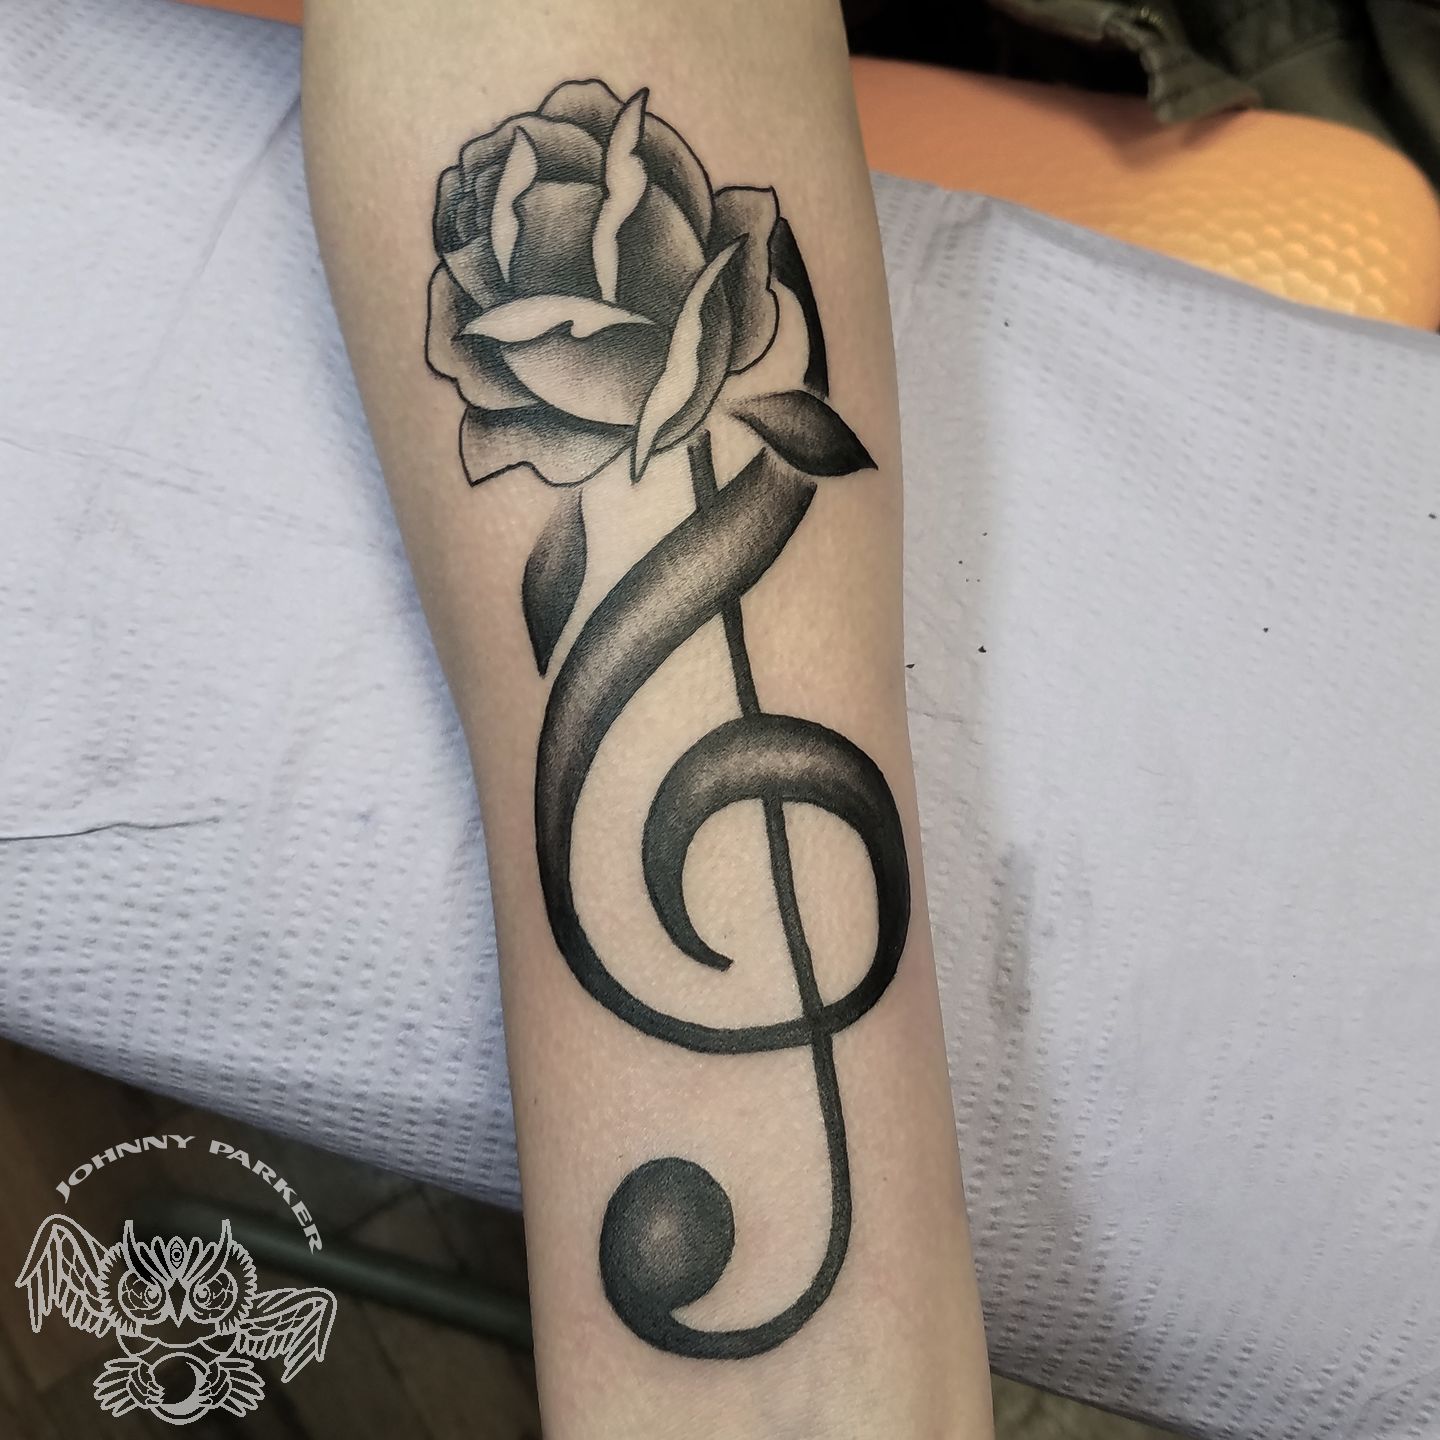 Bothersome  Little treble clef rose tattoo for Alisha   Facebook